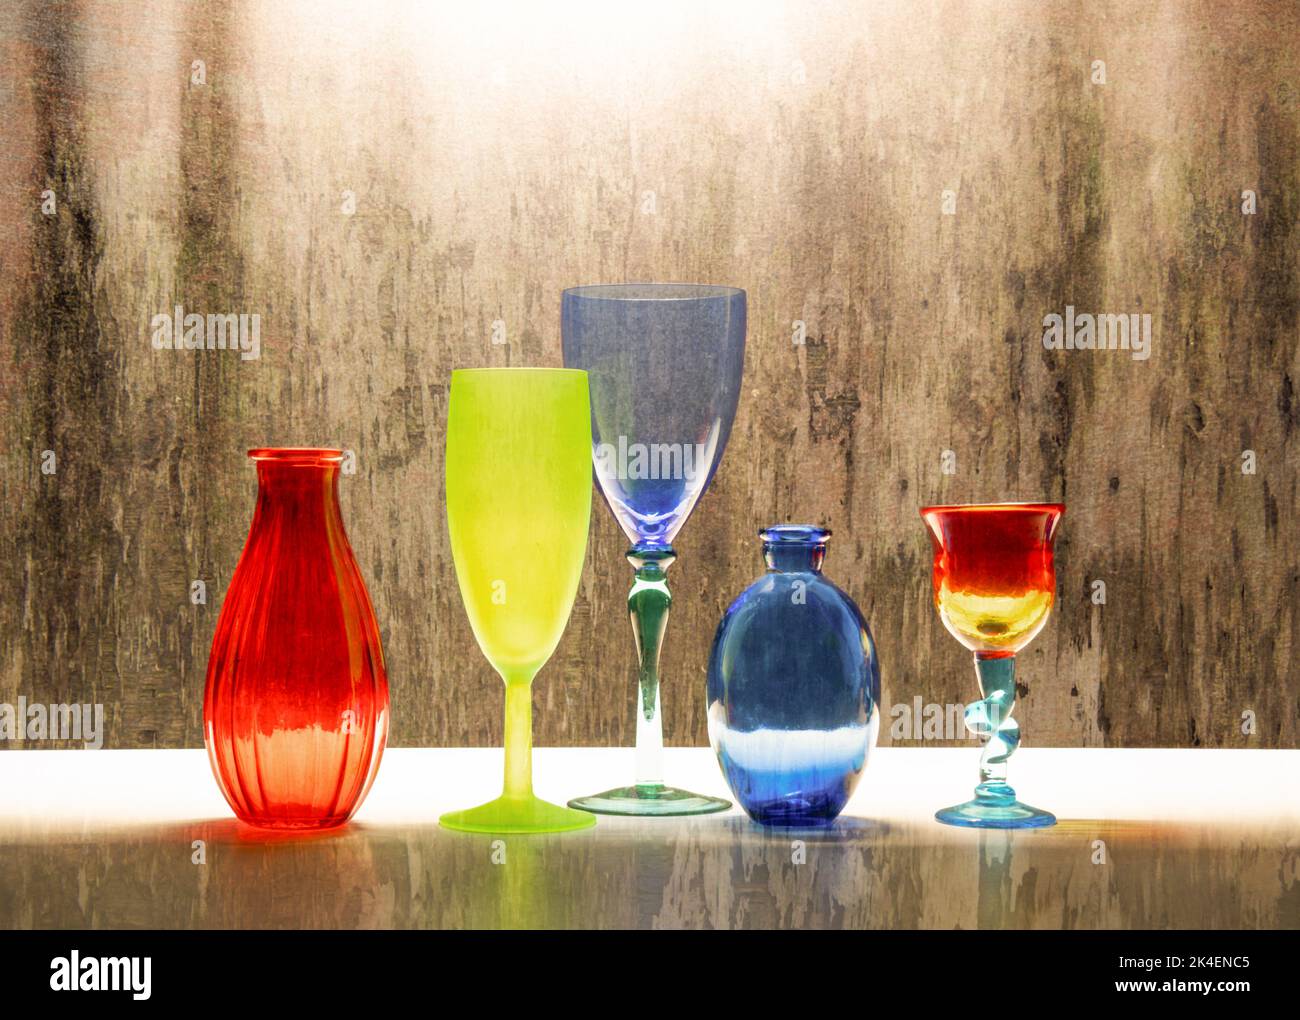 Colourful glassware still life with glasses, a bottle and a vase. Stock Photo